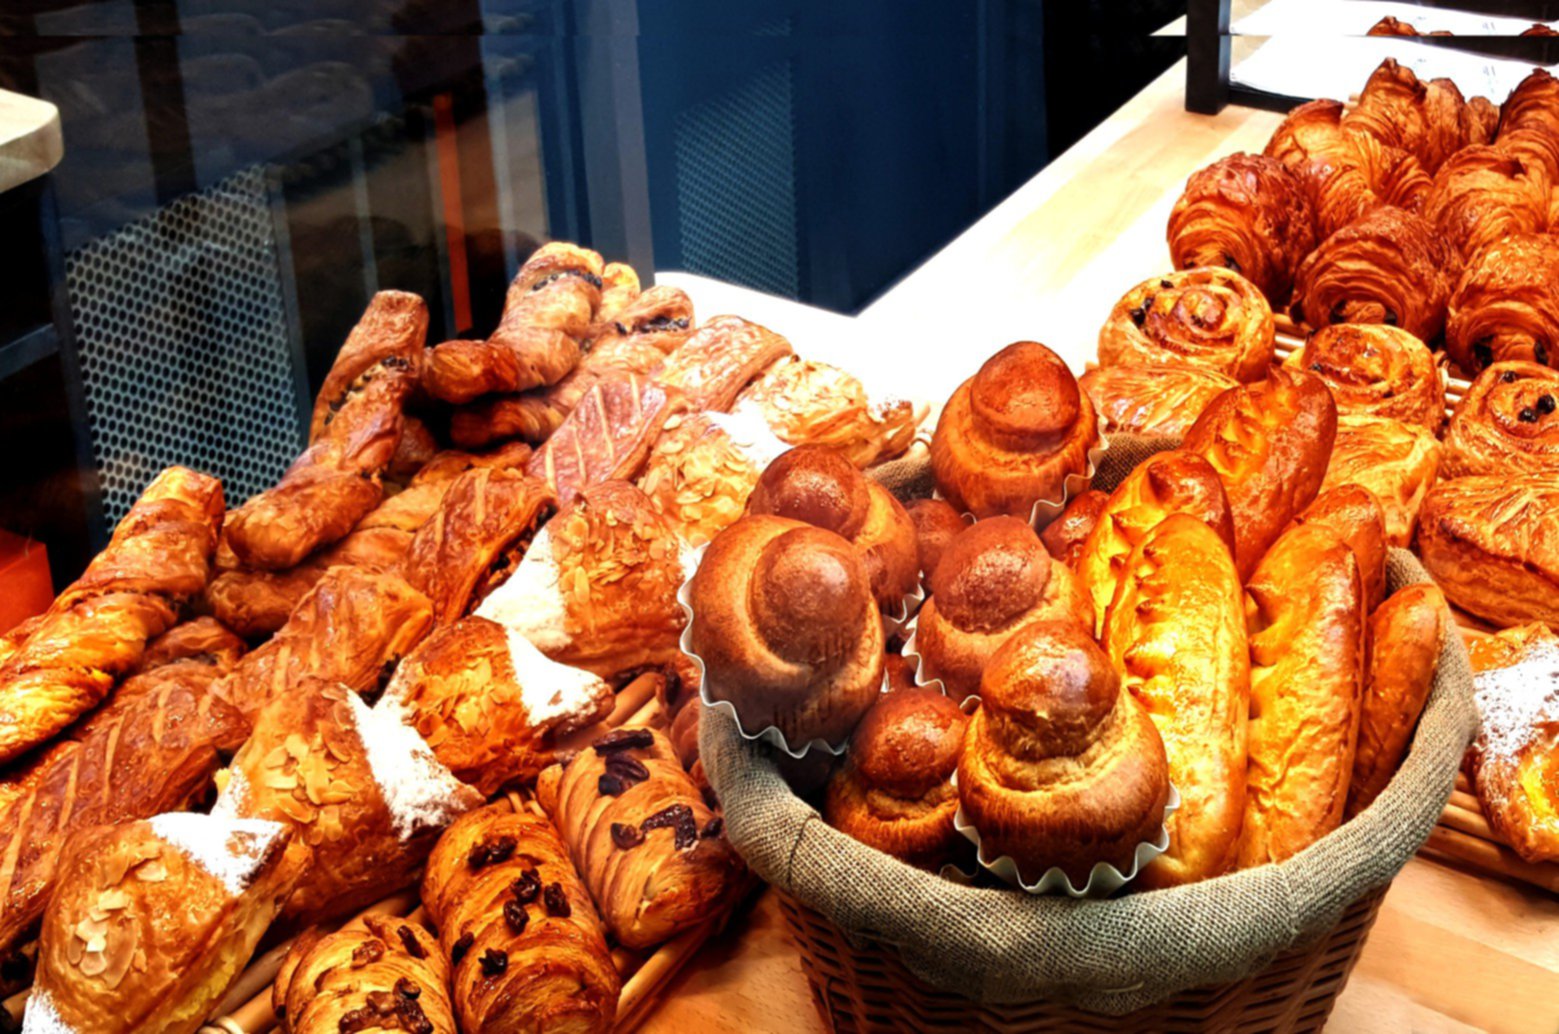 Croissants and Breakfast pastries